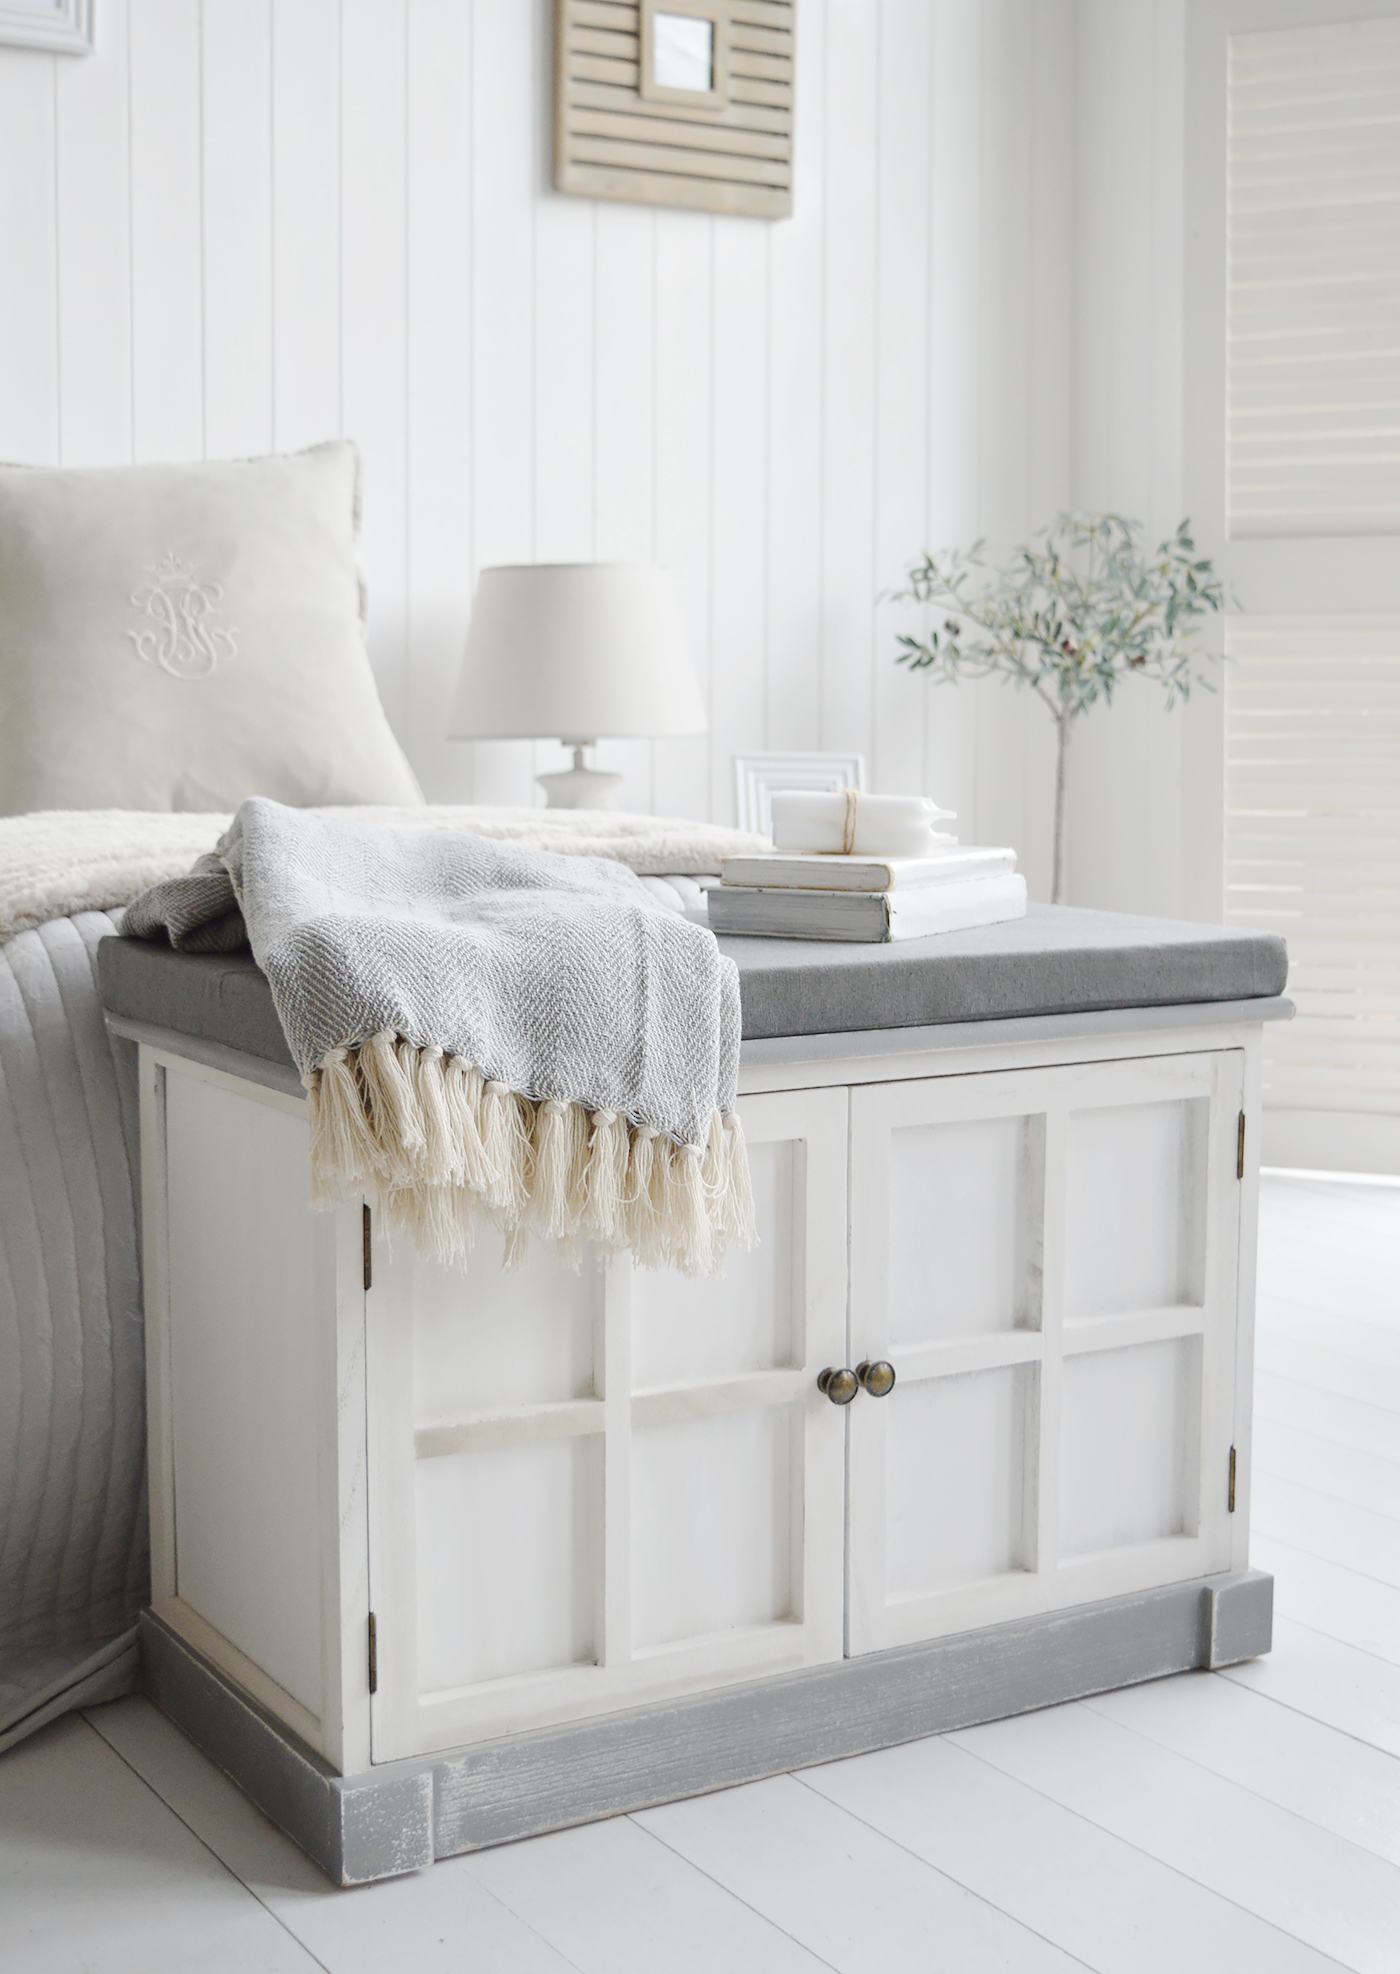 The Charlotte bench in a bedroom at the end of a bed for storage and seating